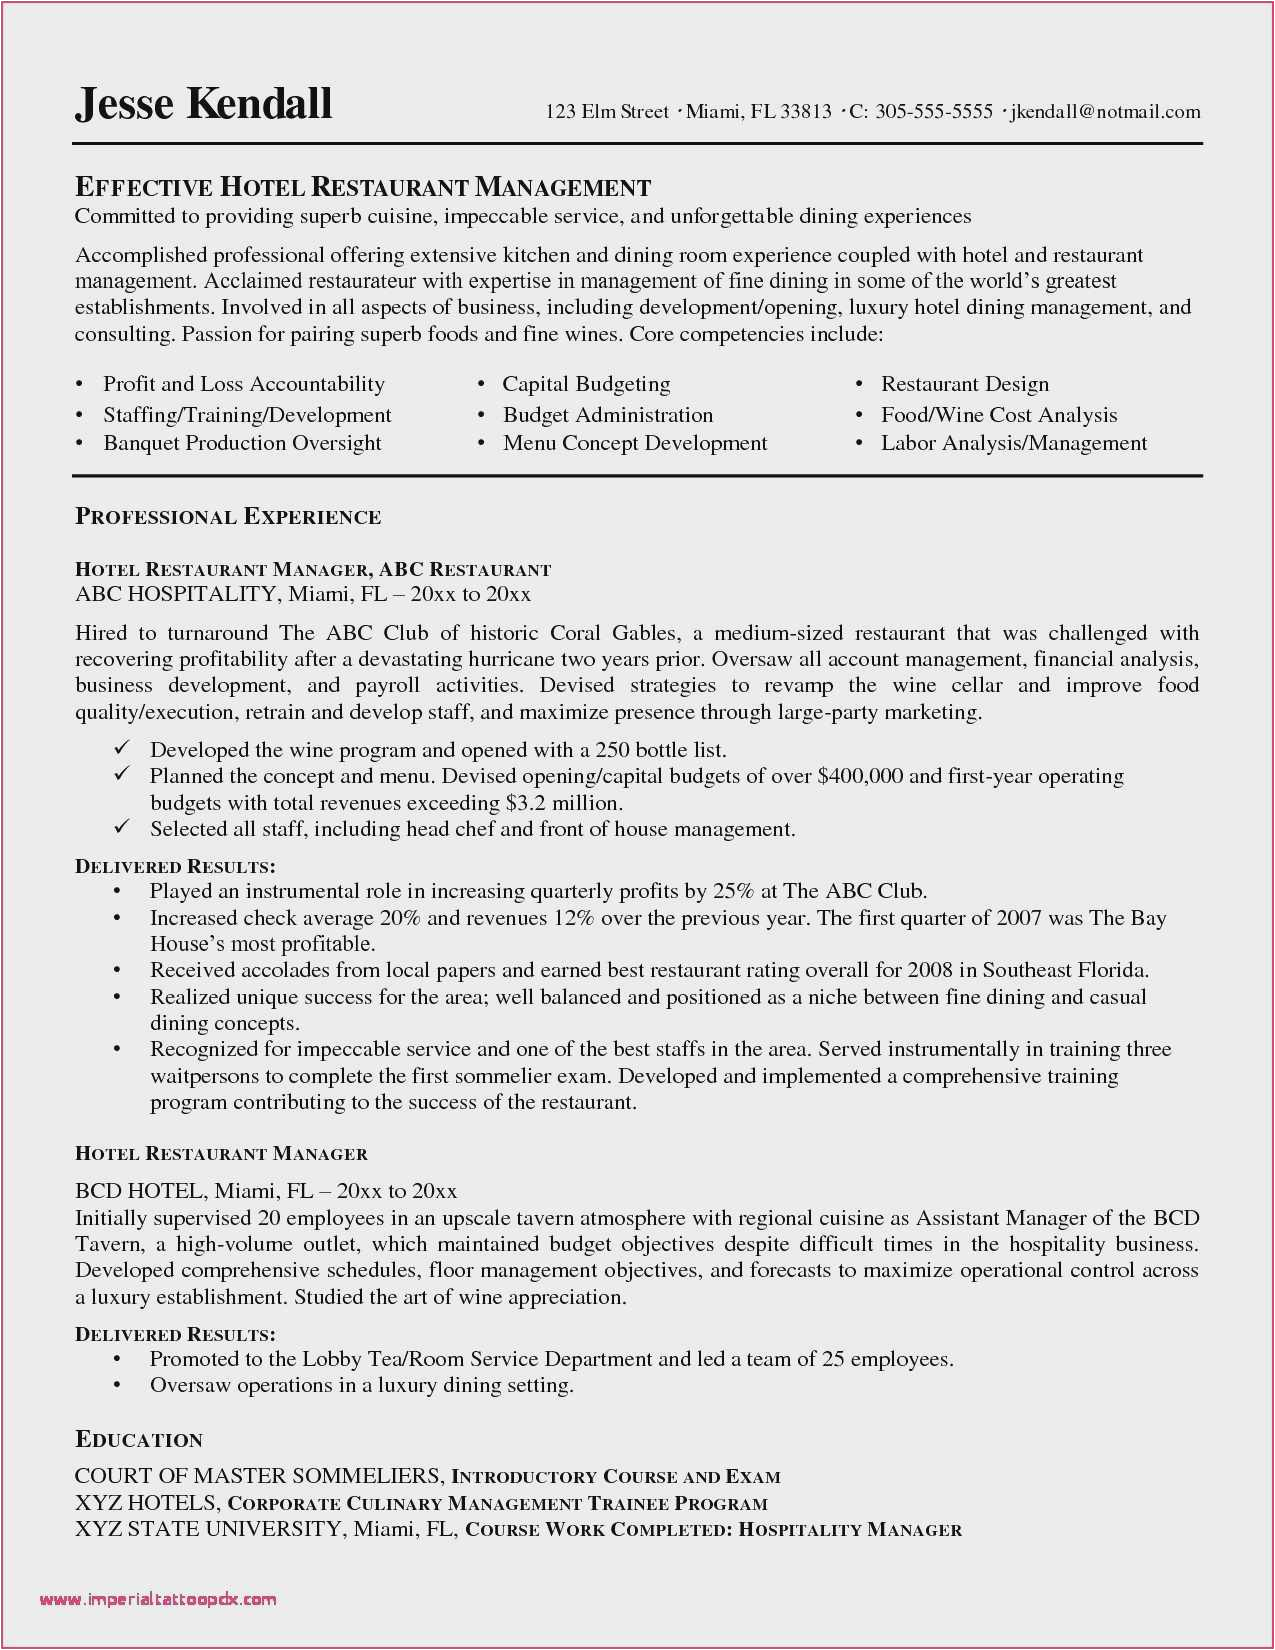 Sample Resume for Hotel and Restaurant Management Graduate Hotel Manager Resume Example 57 Picture